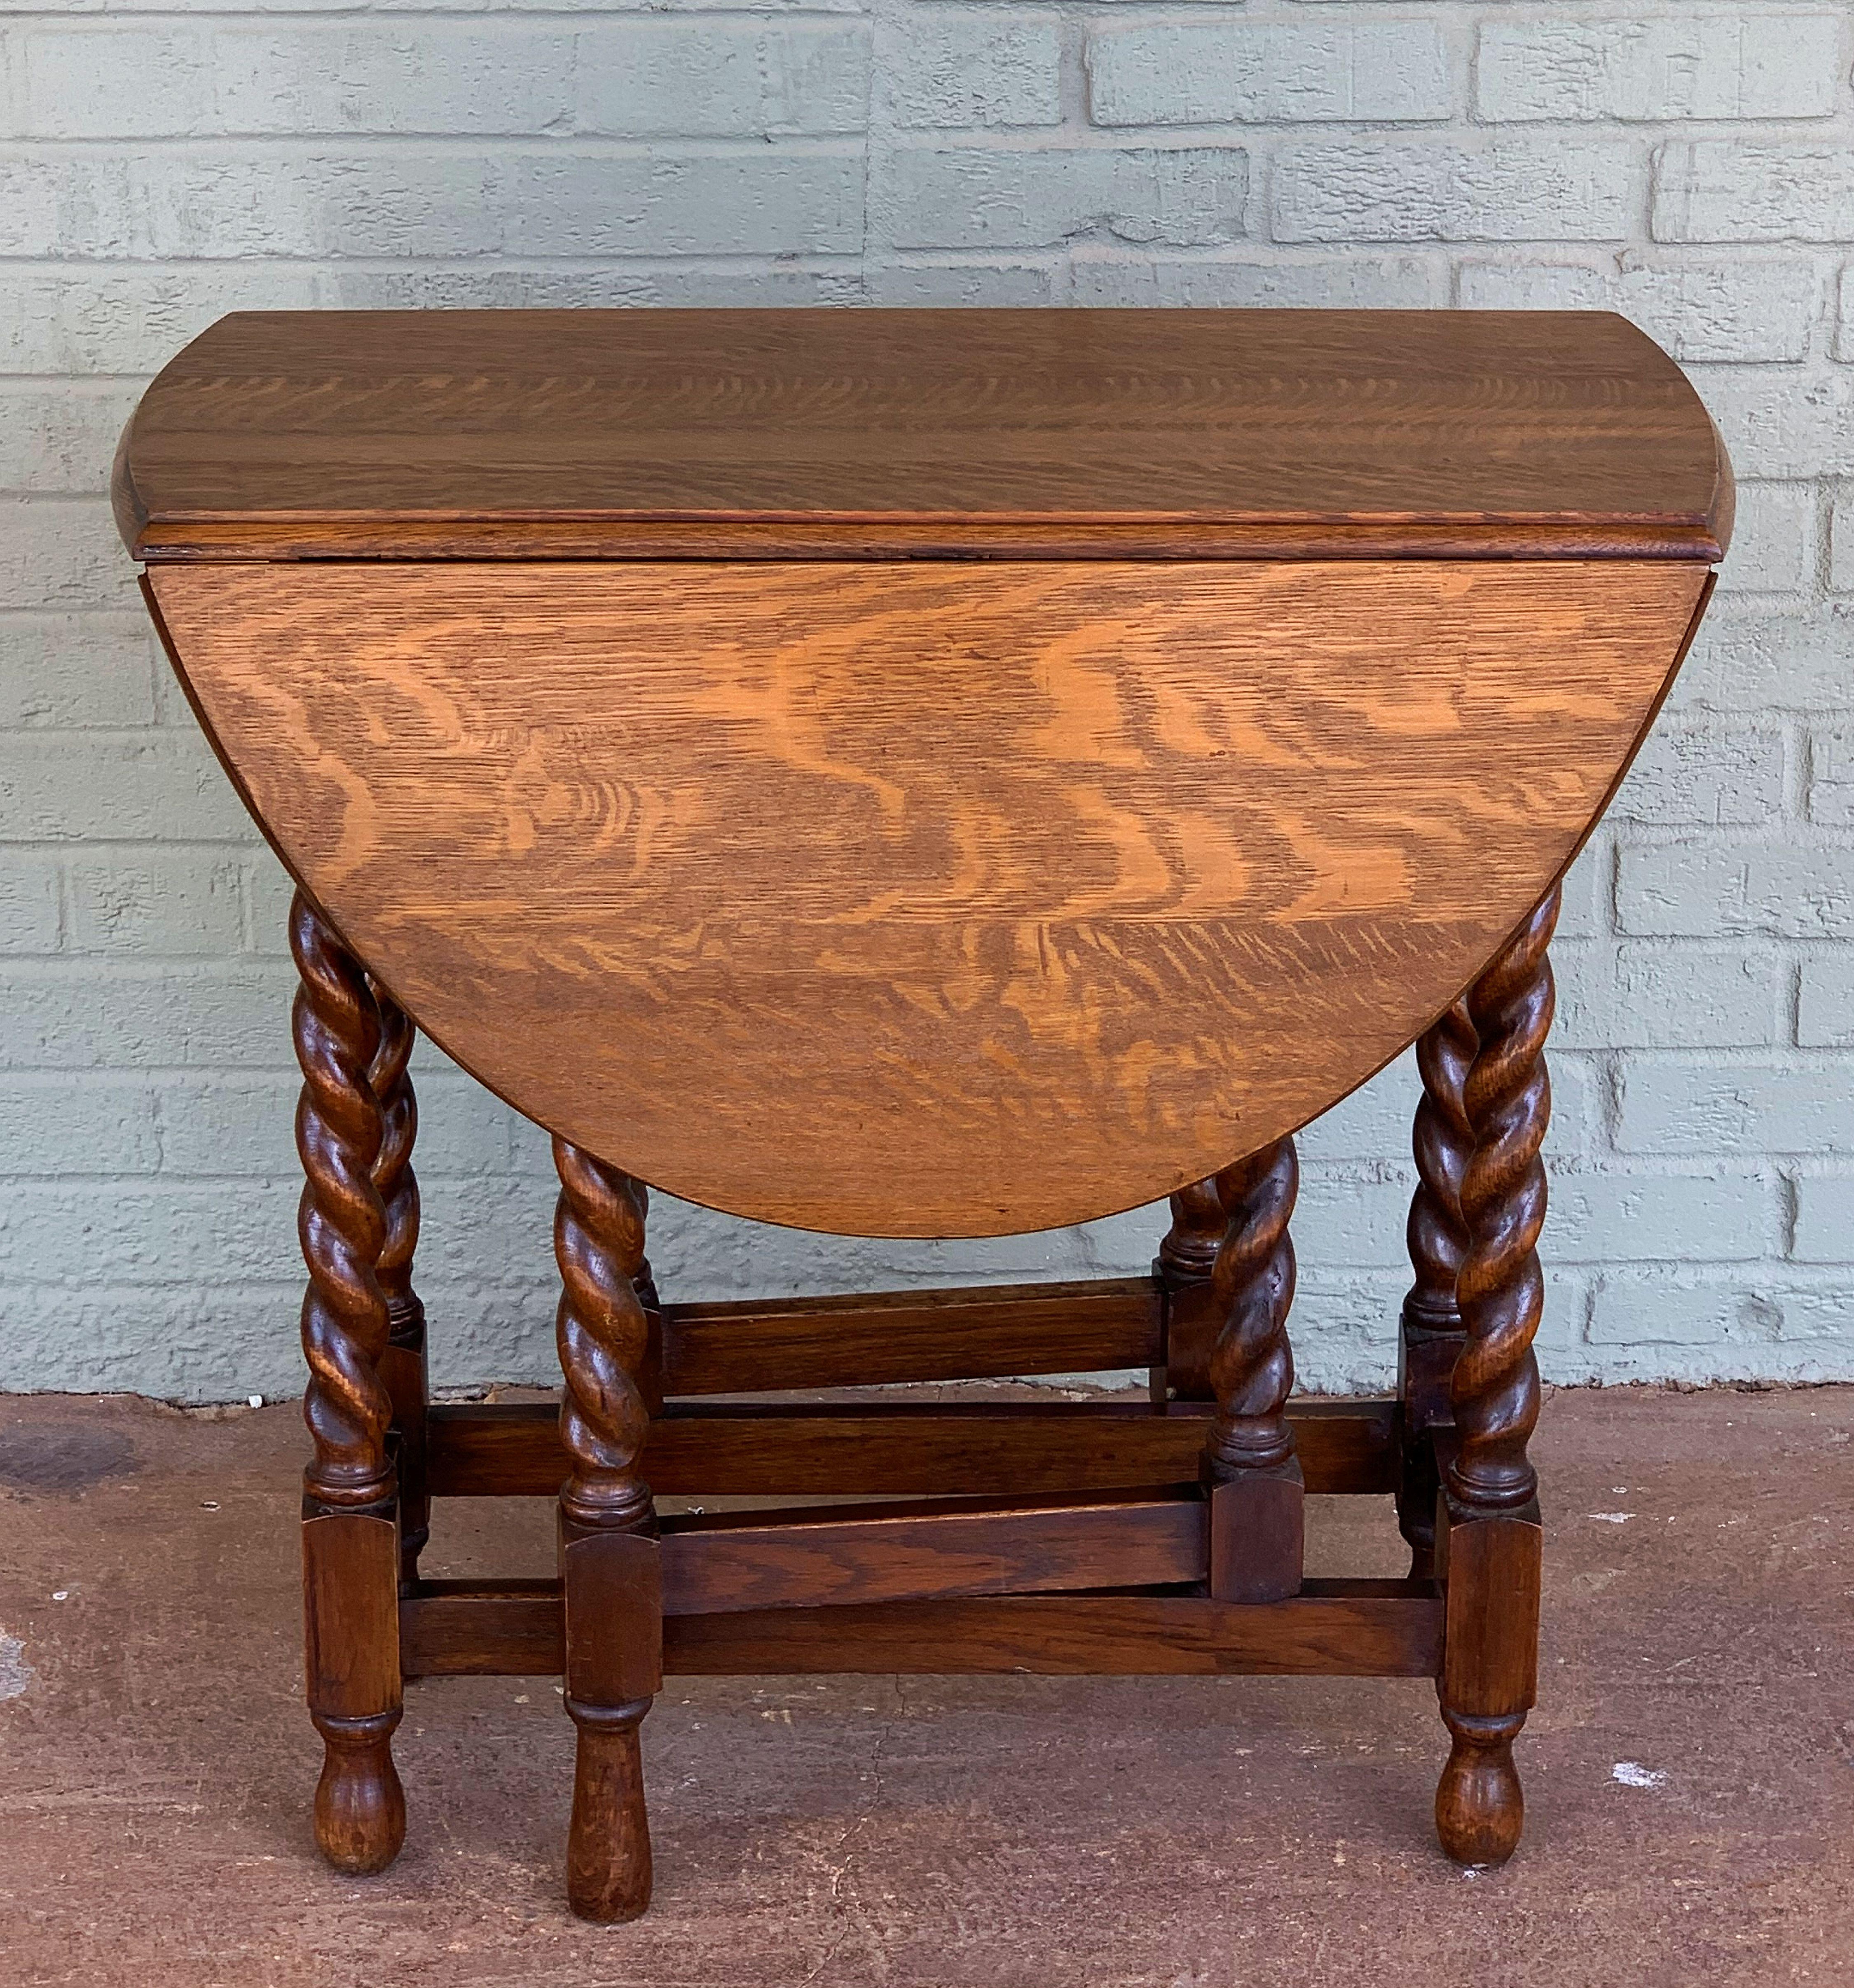 A Classic English drop-leaf gate-leg table of oak, featuring a moulded top with drop-down sides, over a stretcher of six barley-twist supports.
Opens to an oval top.

Measures: Height 28 3/4 inches
Width 30 inches
Depth (Closed) 15 3/4 inches